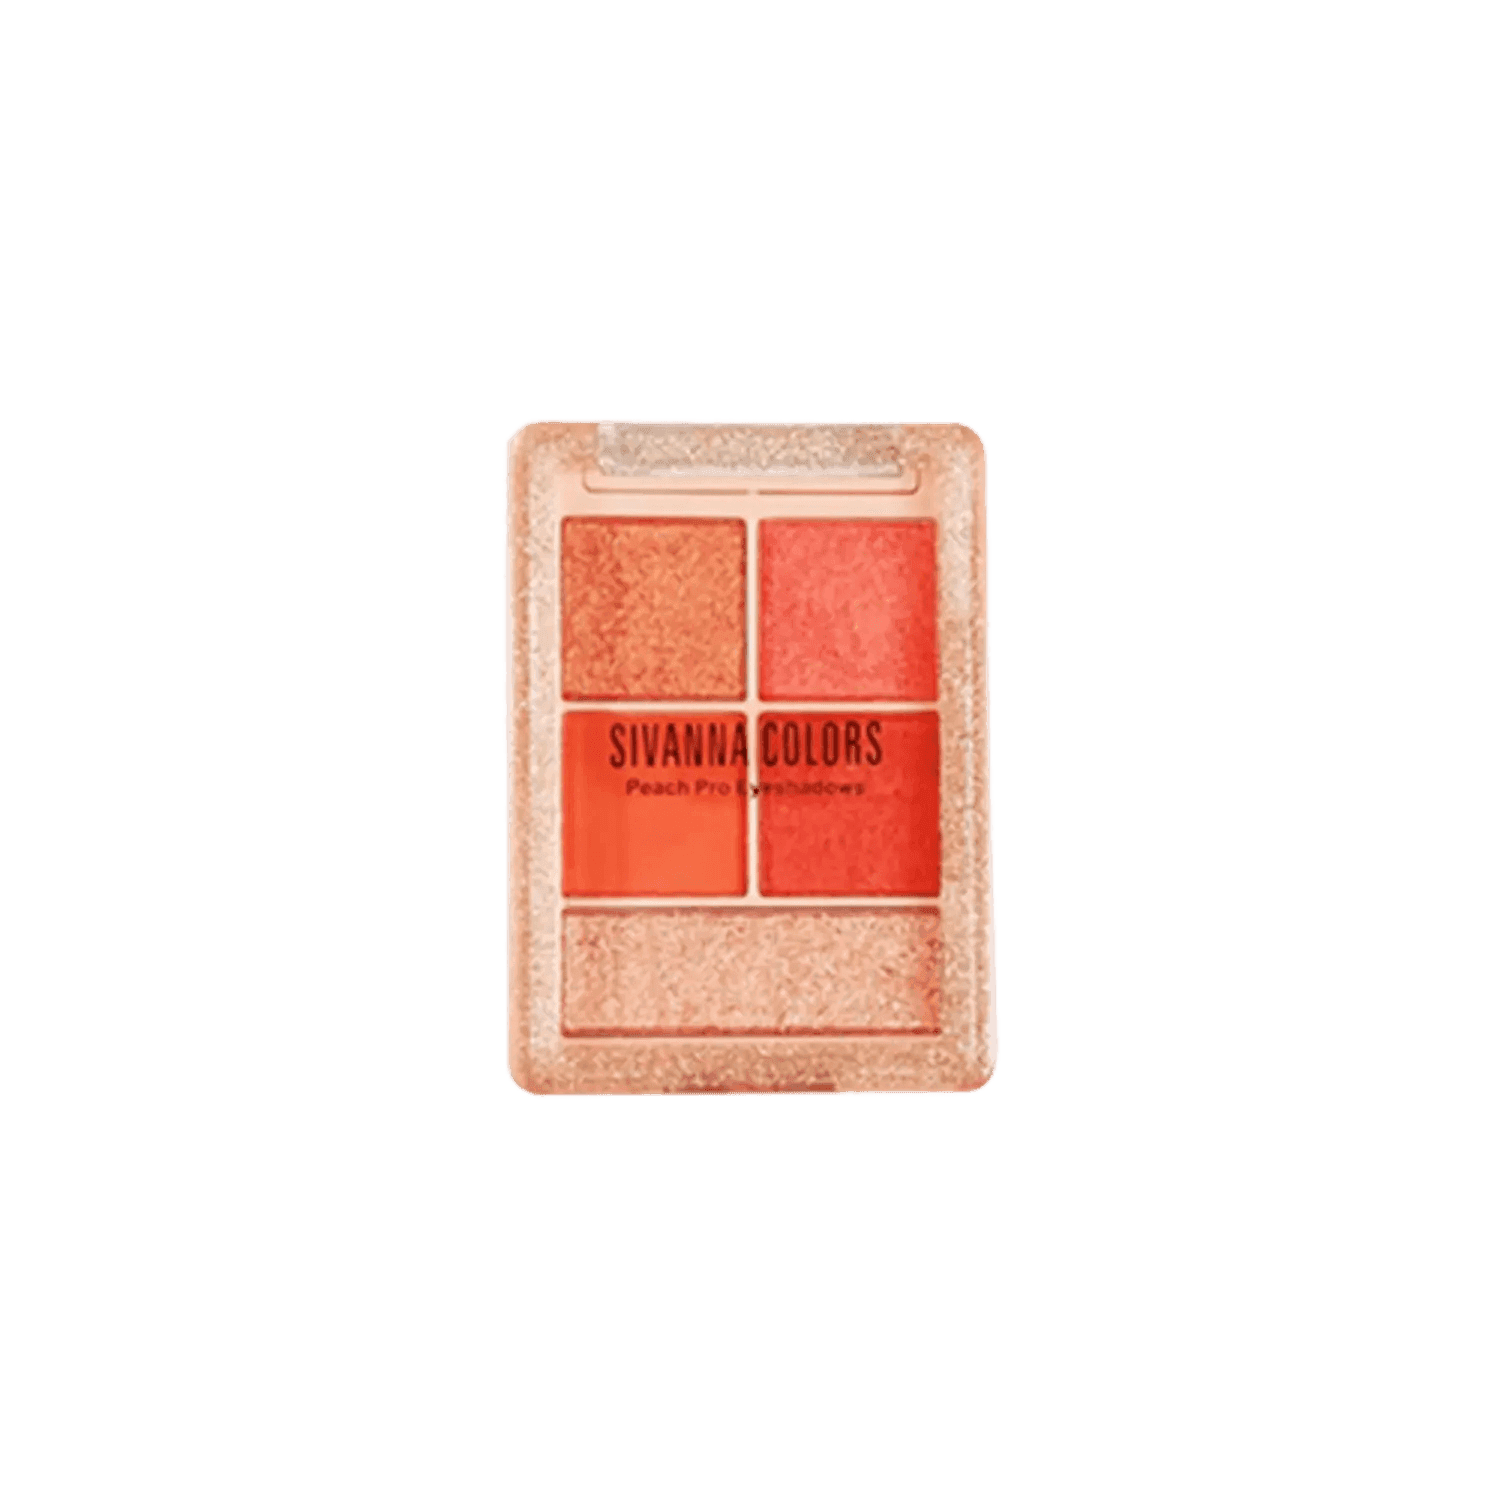 sivanna colors in the peach pro mini eyeshadow palette - 02 shade (6g)